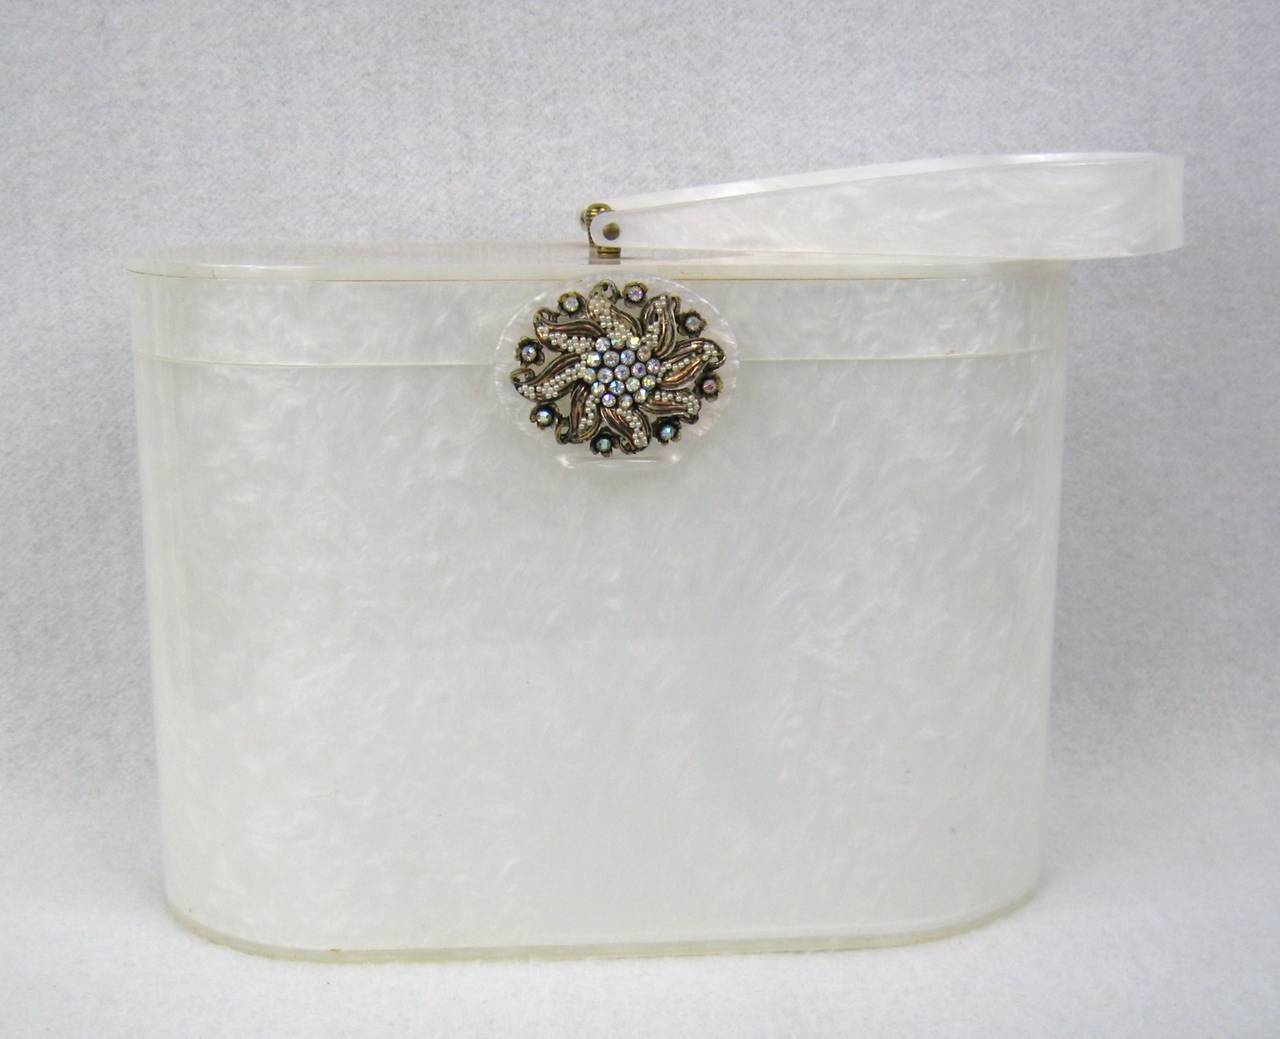 1950s Wilardy Opaque, Marbled White Lucite Purse, Ornate Clasp, Great Handel Mirror inside top of handbag with a Stunning Pearl and Crystal Decorative clasp. Measuring  10 WIDE X 5 DEEP X 7 TALL --6 inches TALL HANDLE. This is out of a massive